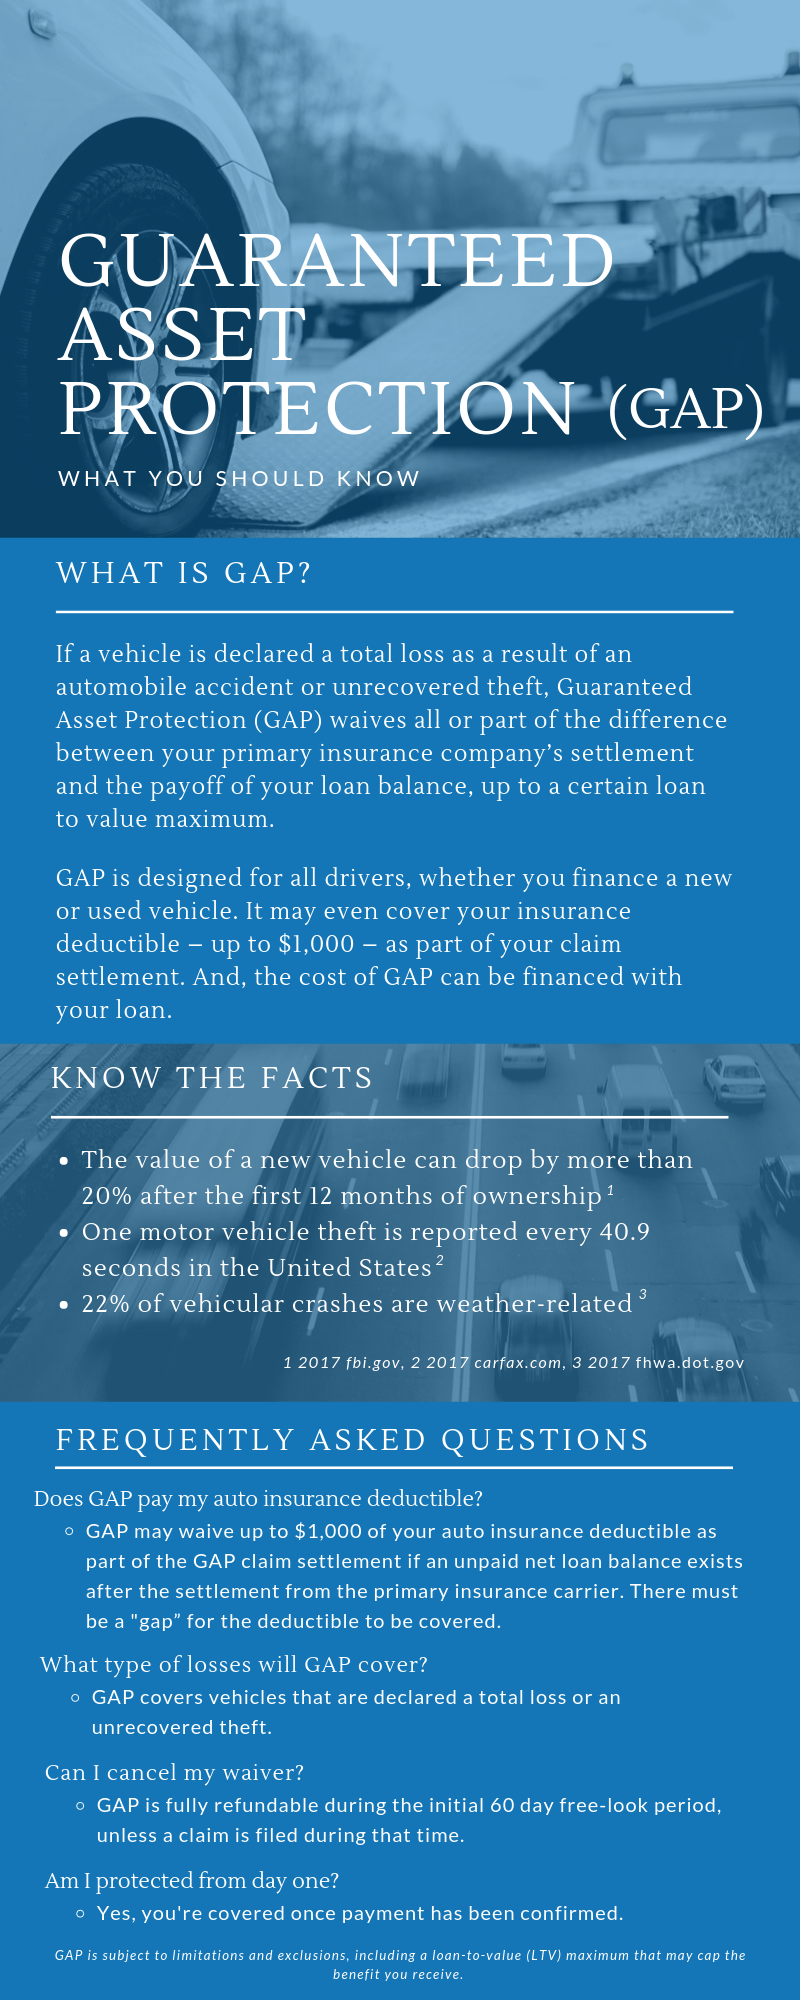 Guaranteed Asset Protection (GAP). What you should know. What is GAP? If a vehicle is declared a total loss as a result of an automobile accident or unrecovered theft, Guaranteed Asset Protection (GAP) waives all or part of the difference between your primary insurance company's settlement and the payoff of your loan balance, up to a certain loan to value maximum. GAP is designed for all drivers, whether you finance a new or used vehicle. It may even cover your insurance deductible - up to $1,000 - as part of your claim settlement. And, the cost of GAP can be financed with your loan. Know the facts. The value of a new vehicle can drop by more than 20%25 after the first 12 months of ownership. One motor vehicle theft is reported every 40.9 seconds in the United States. 22%25 of vehicular crashes are weather-related. Frequently Asked Questions. Does GAP pay my auto insurance deductible? GAP may waive up to $1,000 of your auto insurance dedictible as part of teh GAP claim settlement if an unpaid net loan balance exists after the settlement from the primary insurance carrier. There must be a "gap" for the deductible to be covered. What type of losses will GAP cover? GAP covers vehicles that are declared a total loss or an unrecovered theft. Can I cancel my waiver? GAP is fully refundable during the initial 60 day free-look period, unless a claim is filed during that time. Am I protected from day one? Yes, you're covered once payment has been confirmed. GAP has been subject to limitations and exclusions, including a loan-to-value (LTV) maximum that may cap the benefit you receive.